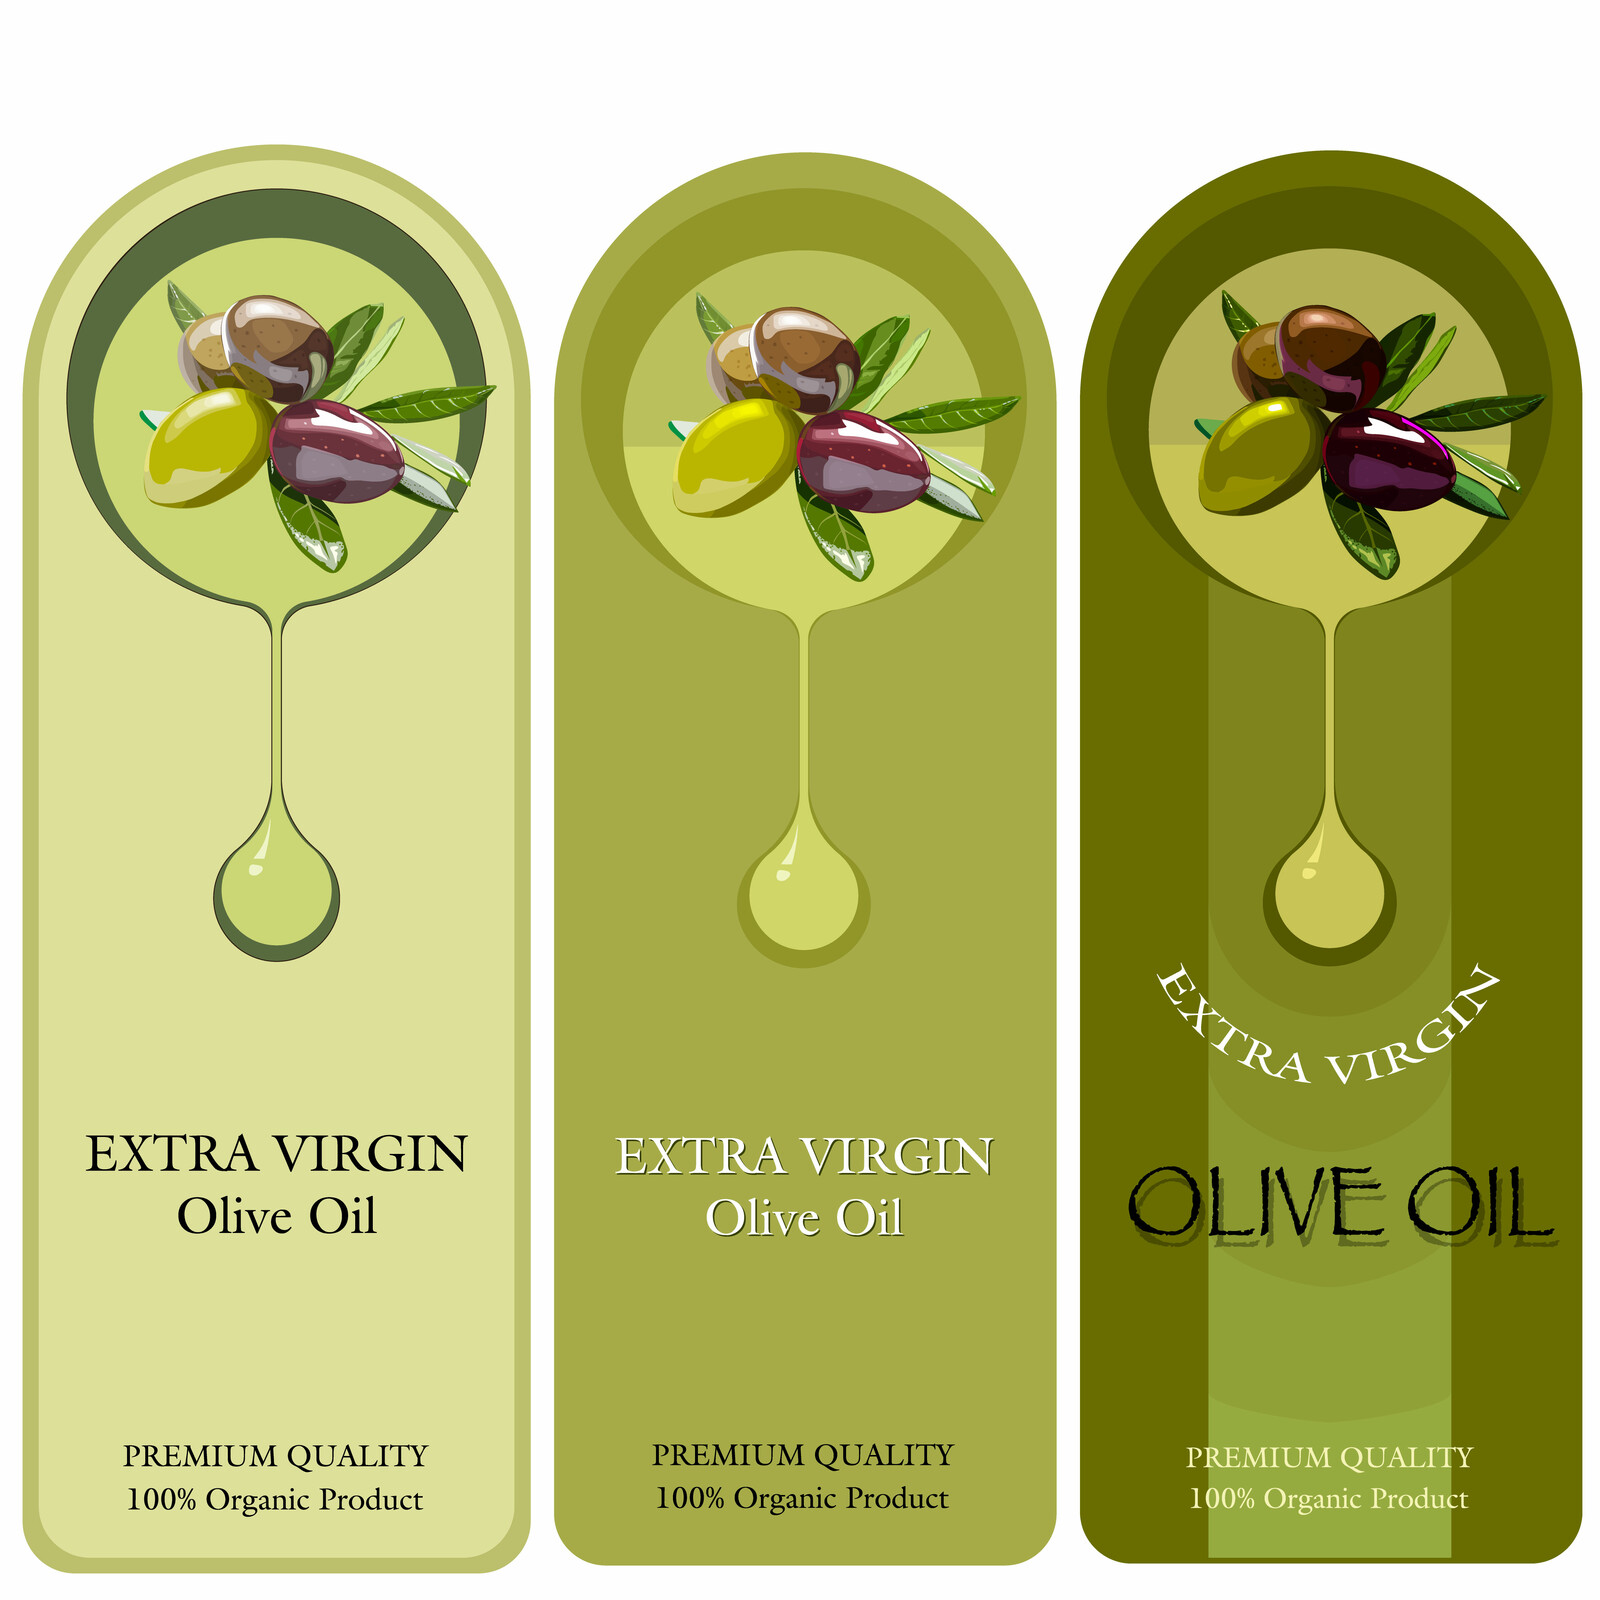 OLIVE LABEL VECTOR    8                                                                              